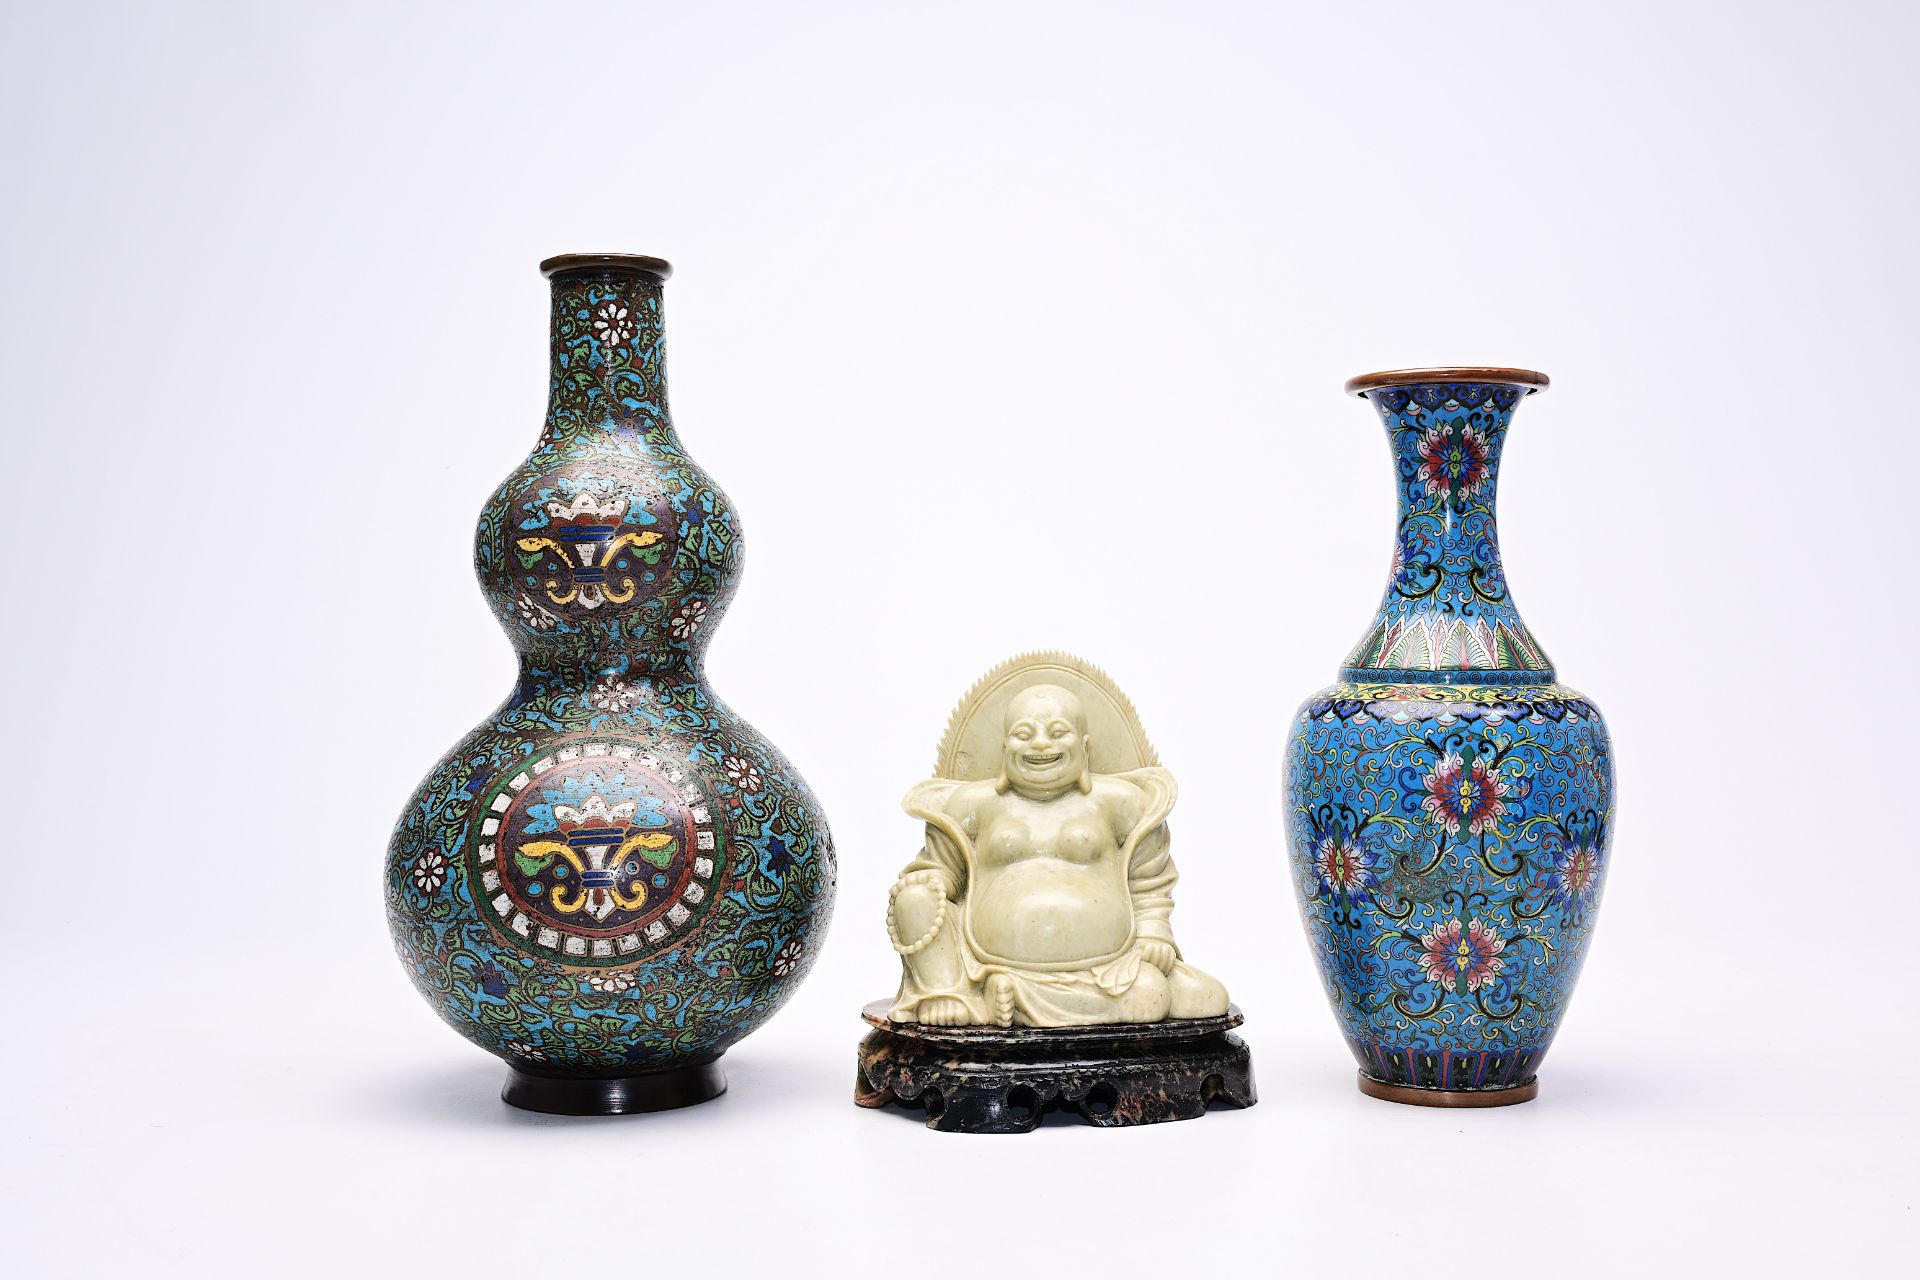 Two cloisonne and champleve vases and a soapstone figure of Buddha, China and Japan, 19th/20th C.